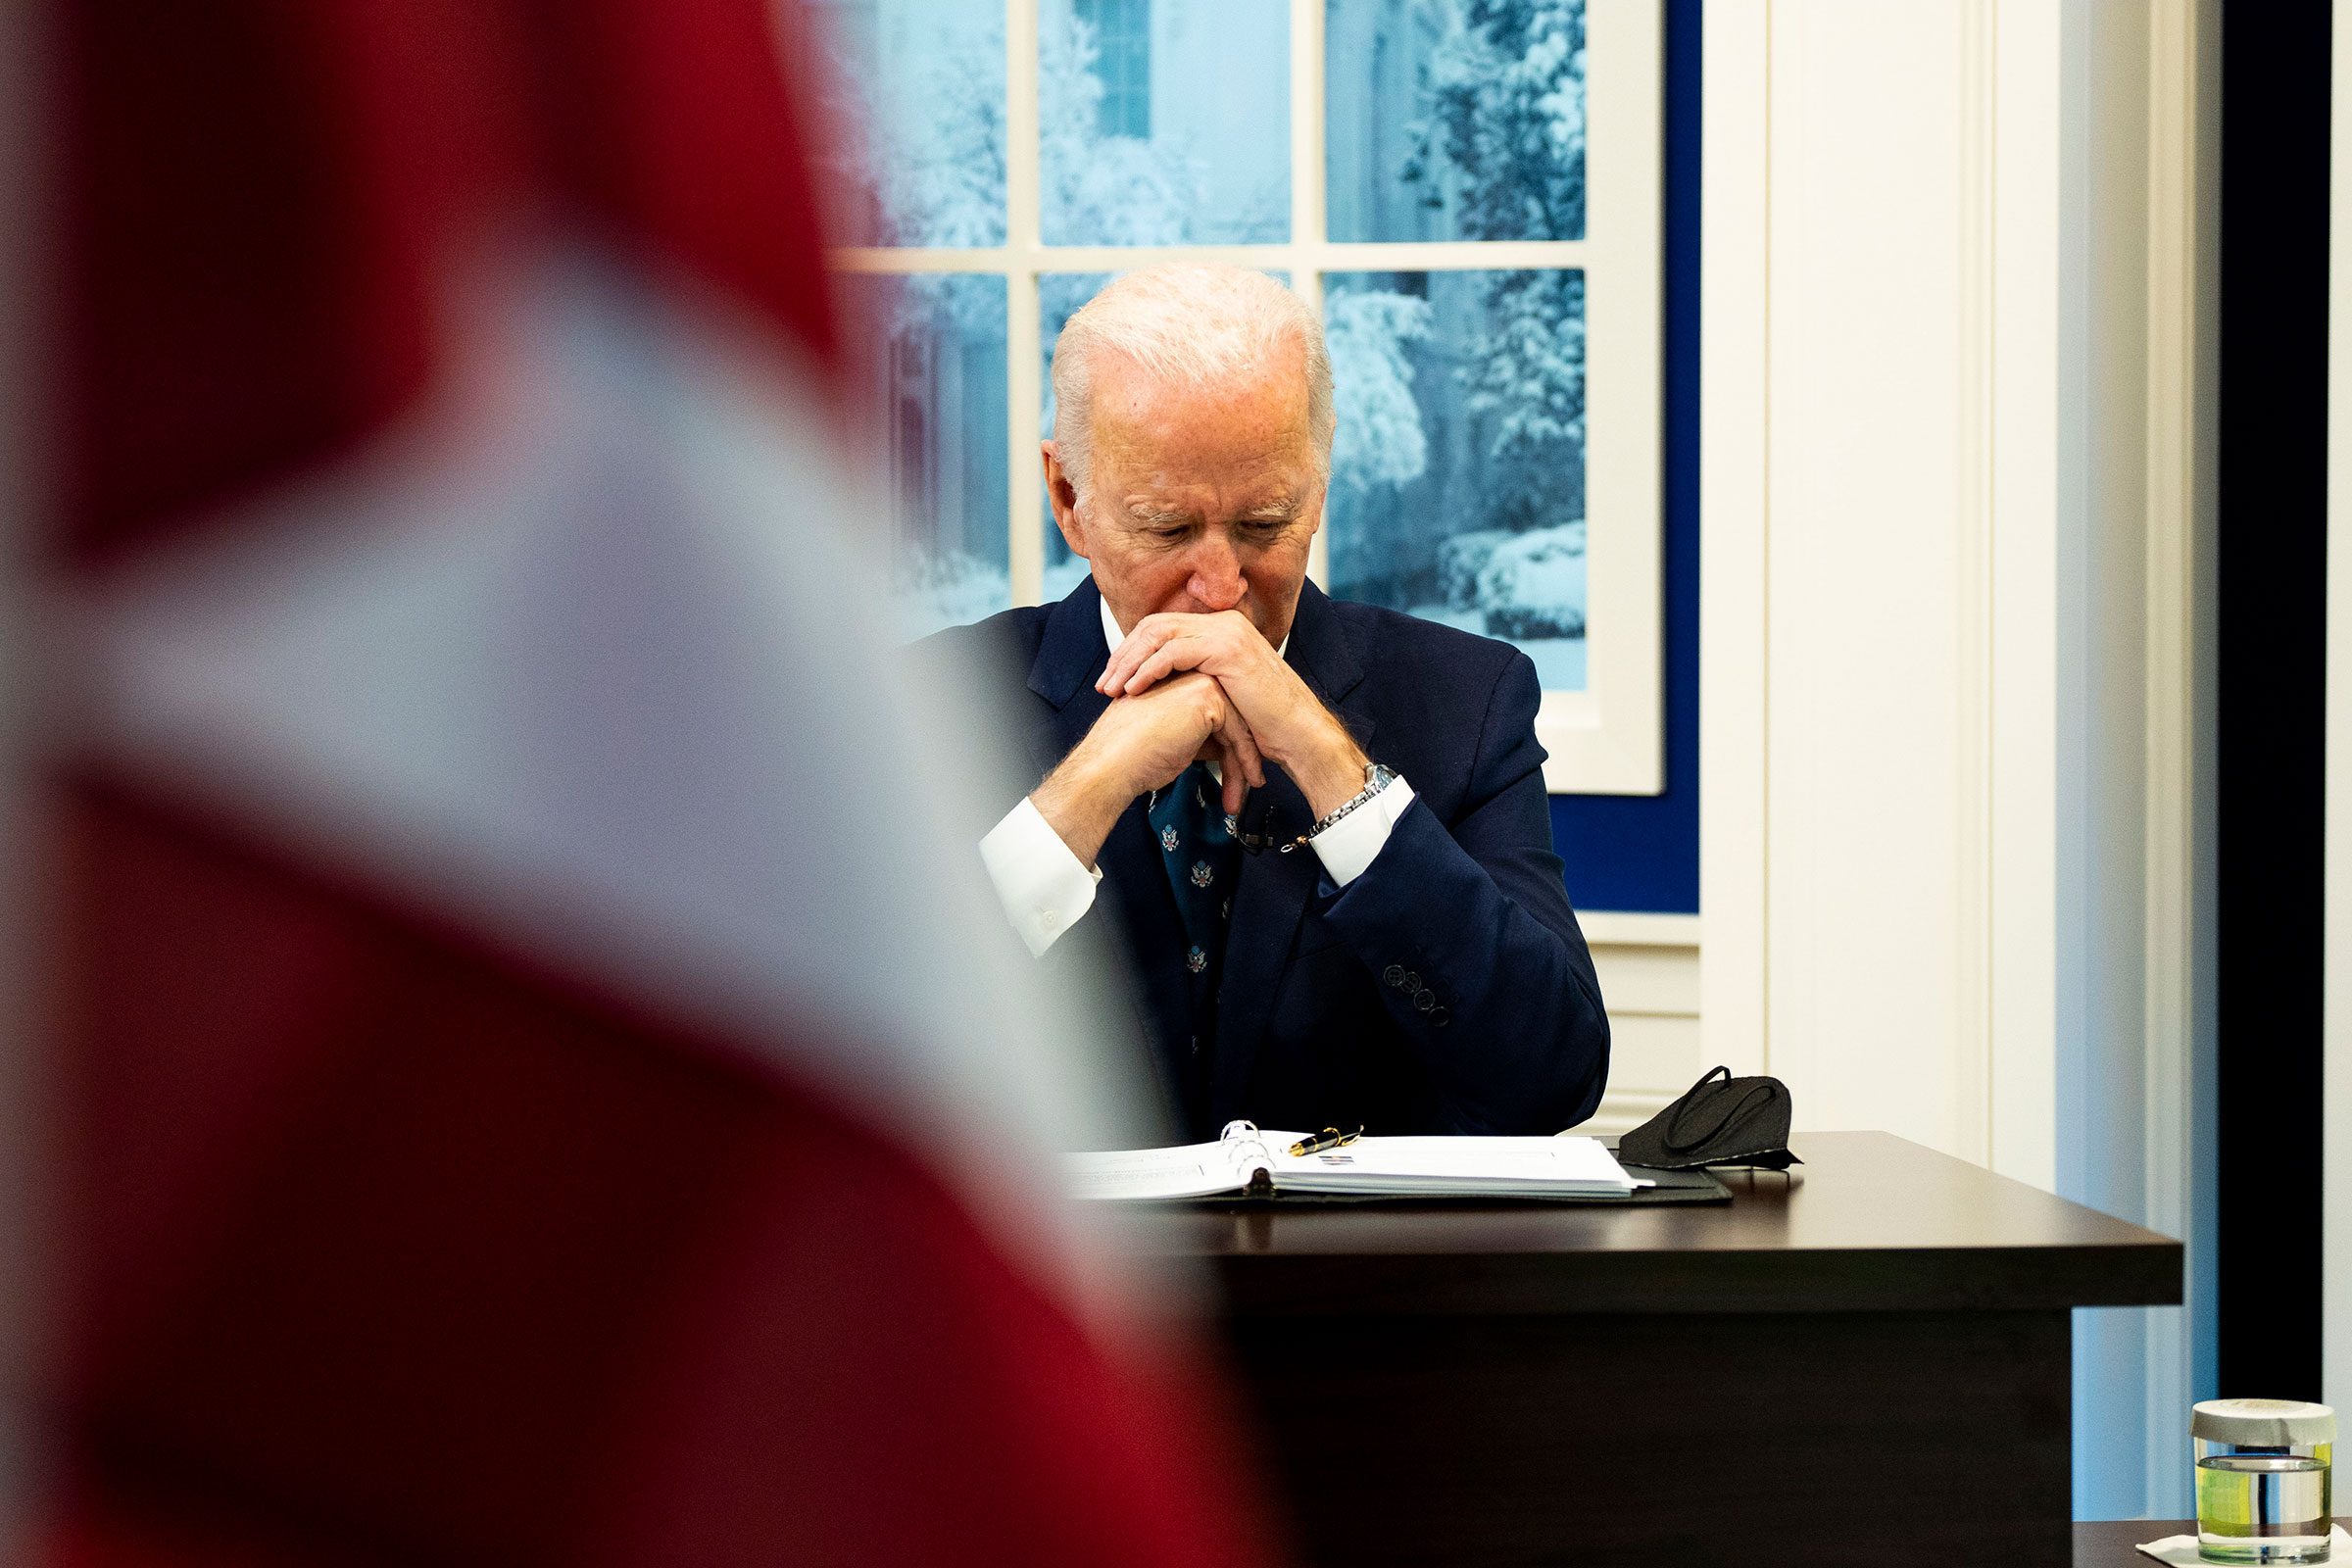 Biden gets low marks from Americans for his handling of the presidency at home and abroad in his first year in office (Doug Mills—The New York Times/Redux)